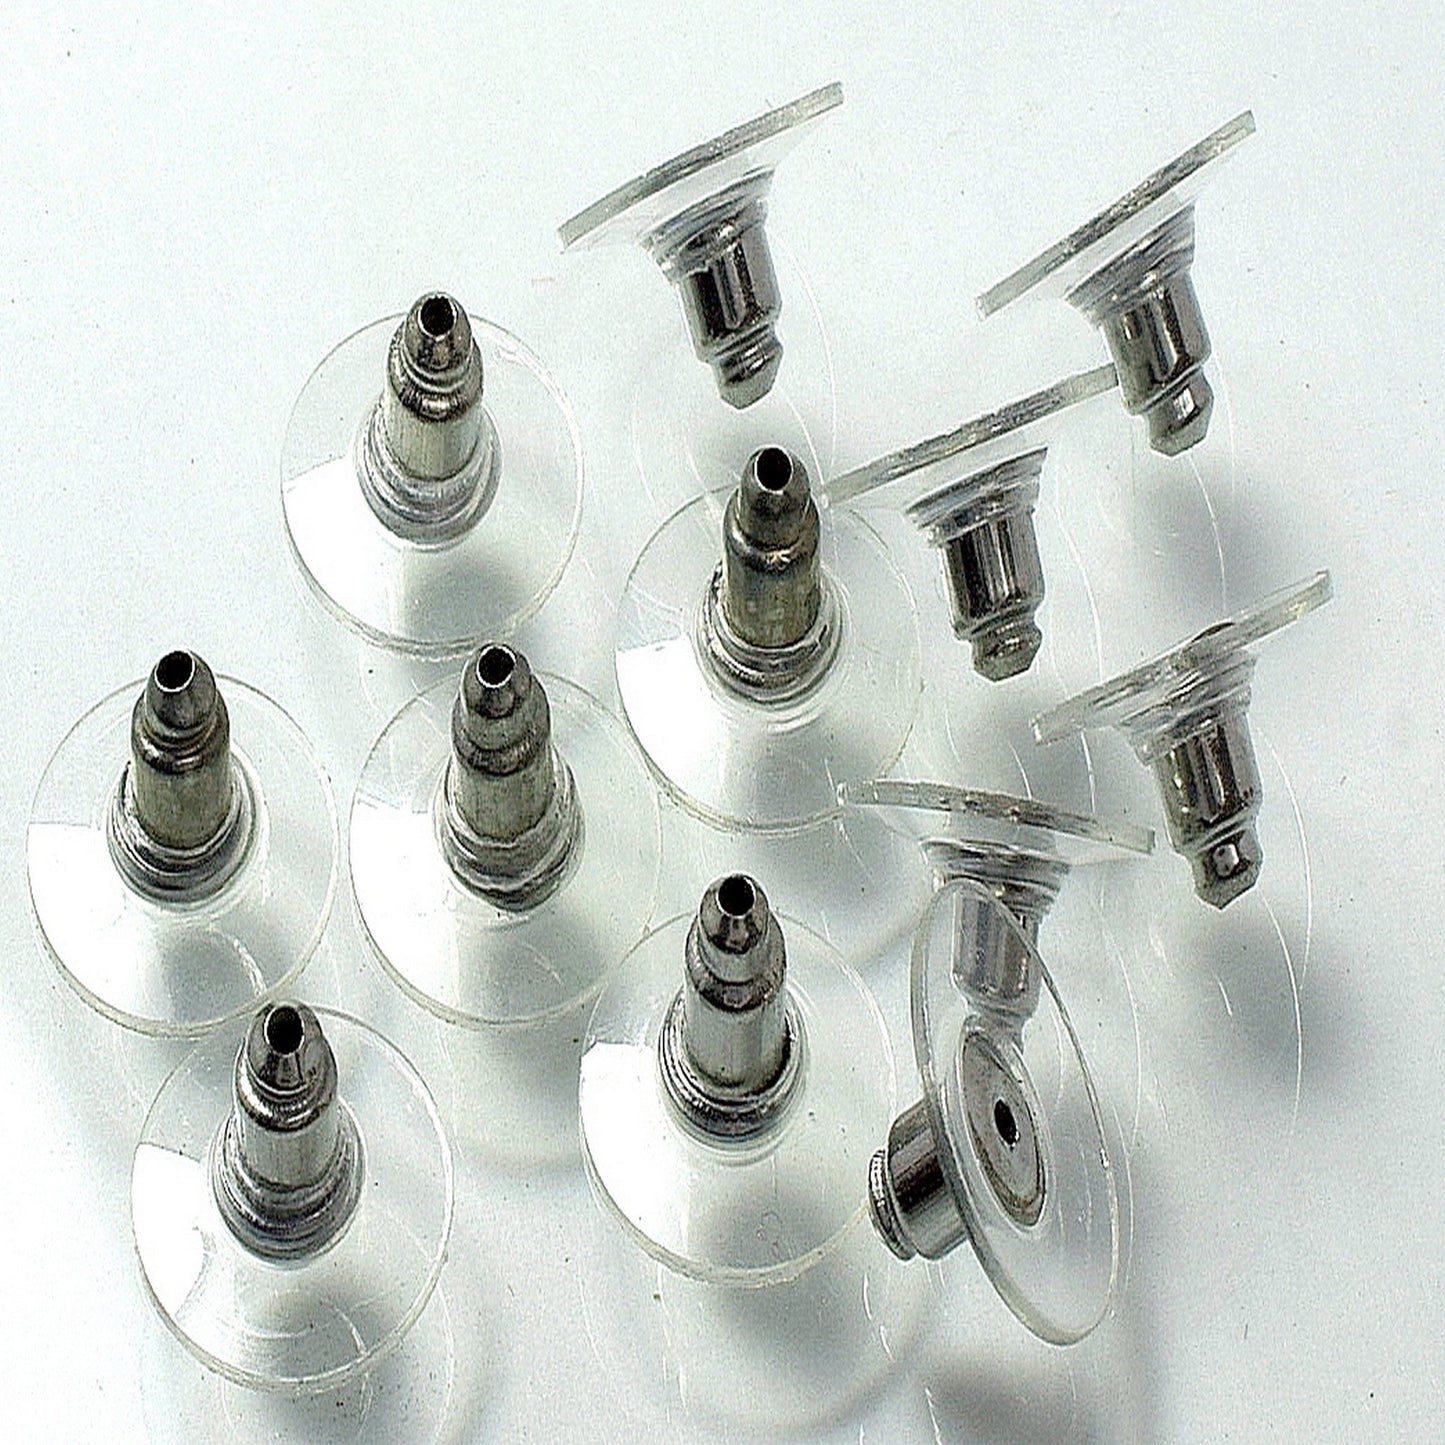 Silicon Clear Stainless Steel Earring Backing 11mm and fit 0.8-1.0mm hole Replacement back Earring Lock comfort backing and smooth